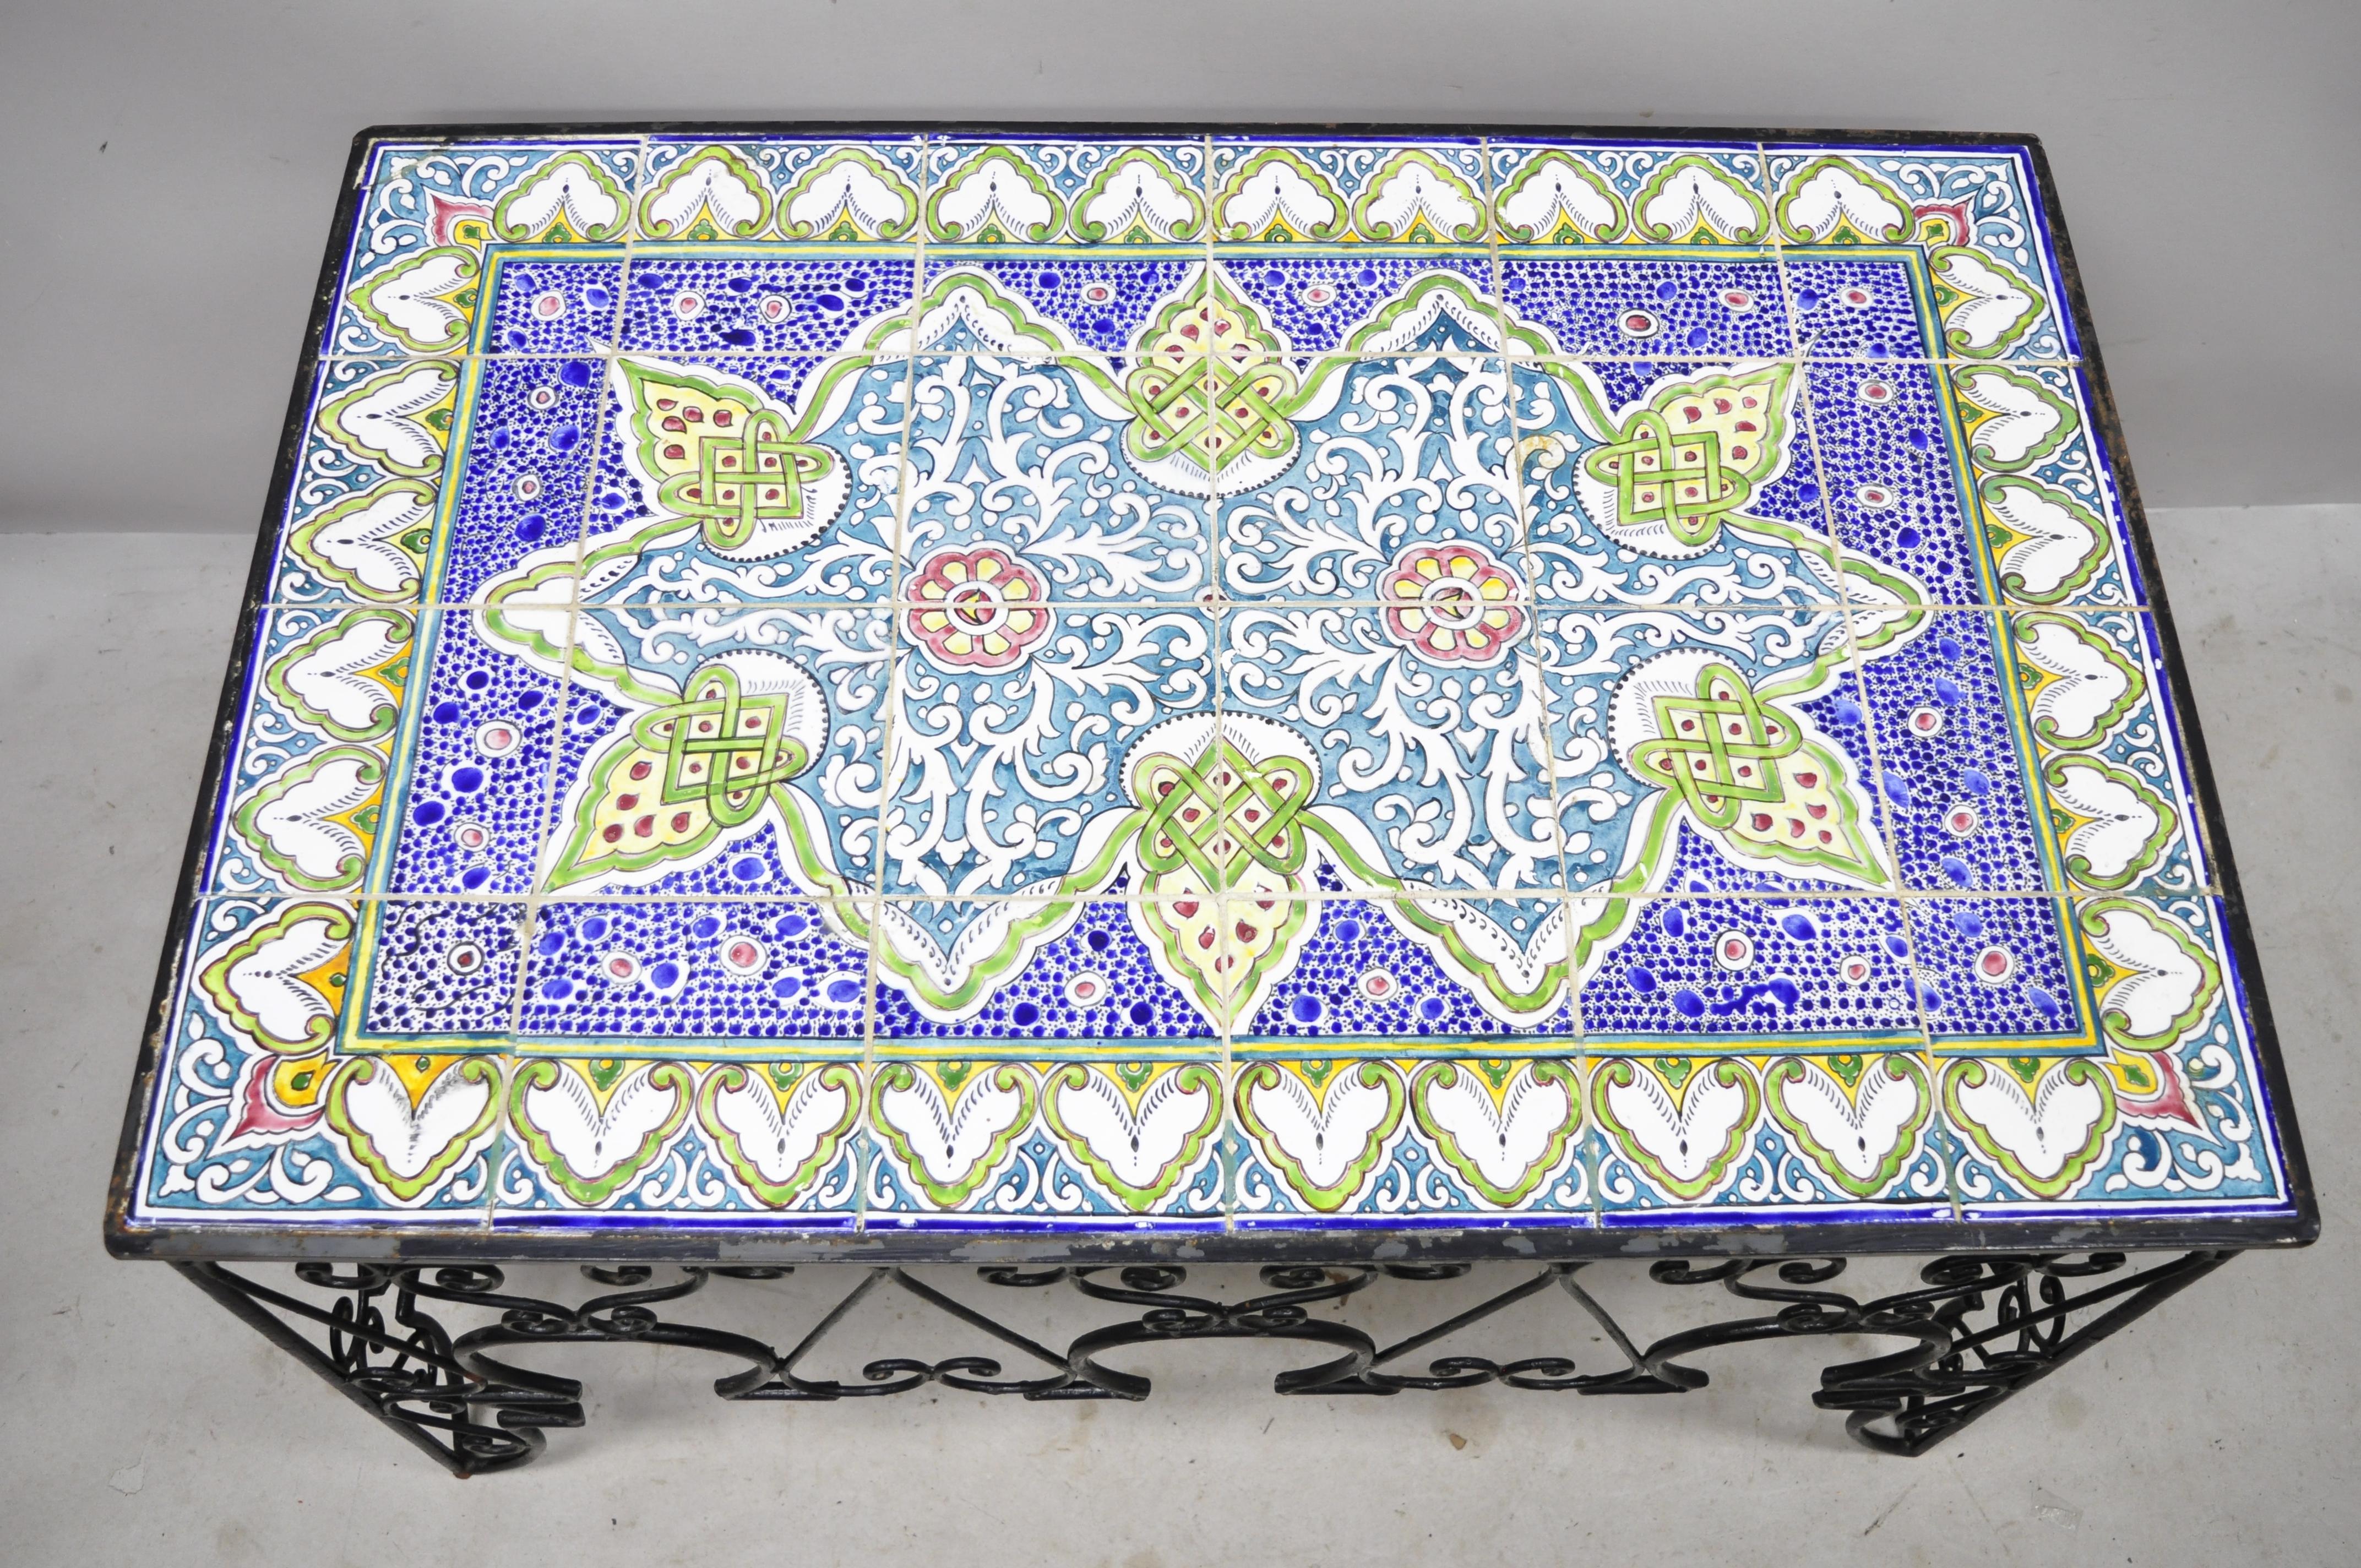 Antique Arts & Crafts ceramic California tile wrought iron coffee table attributed to Catalina. Item features (24) tiles, ornate wrought iron scrollwork base, stunning blue and green colors, very nice antique item, great style and form. Possibly by